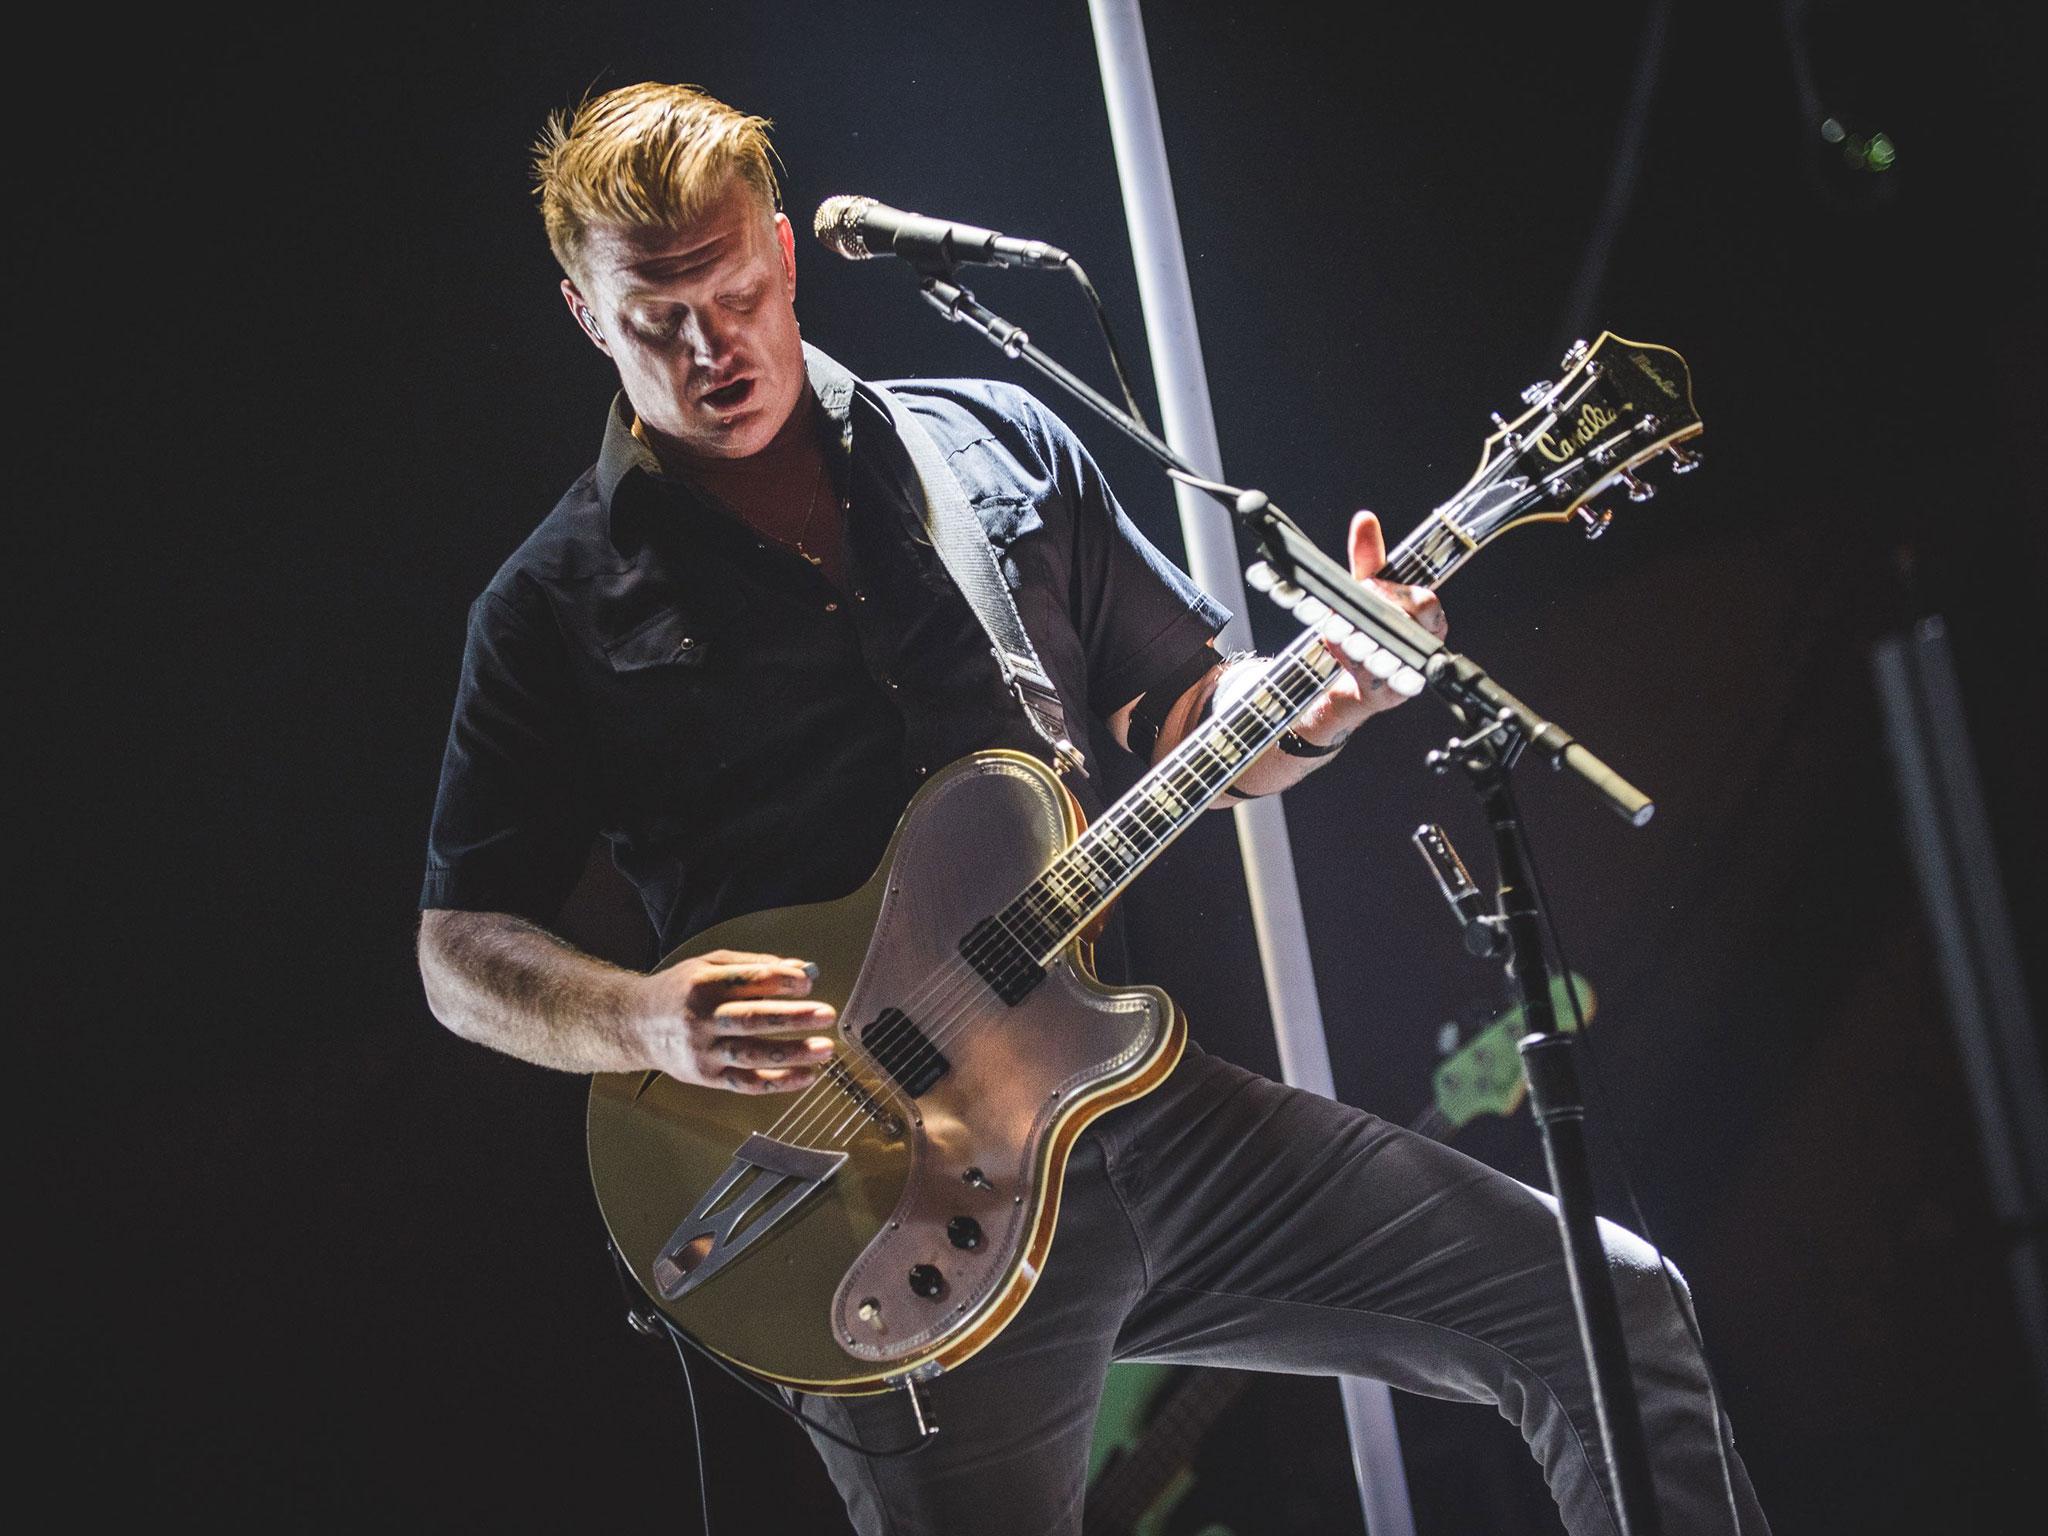 Queens of the Stone Age's Josh Homme